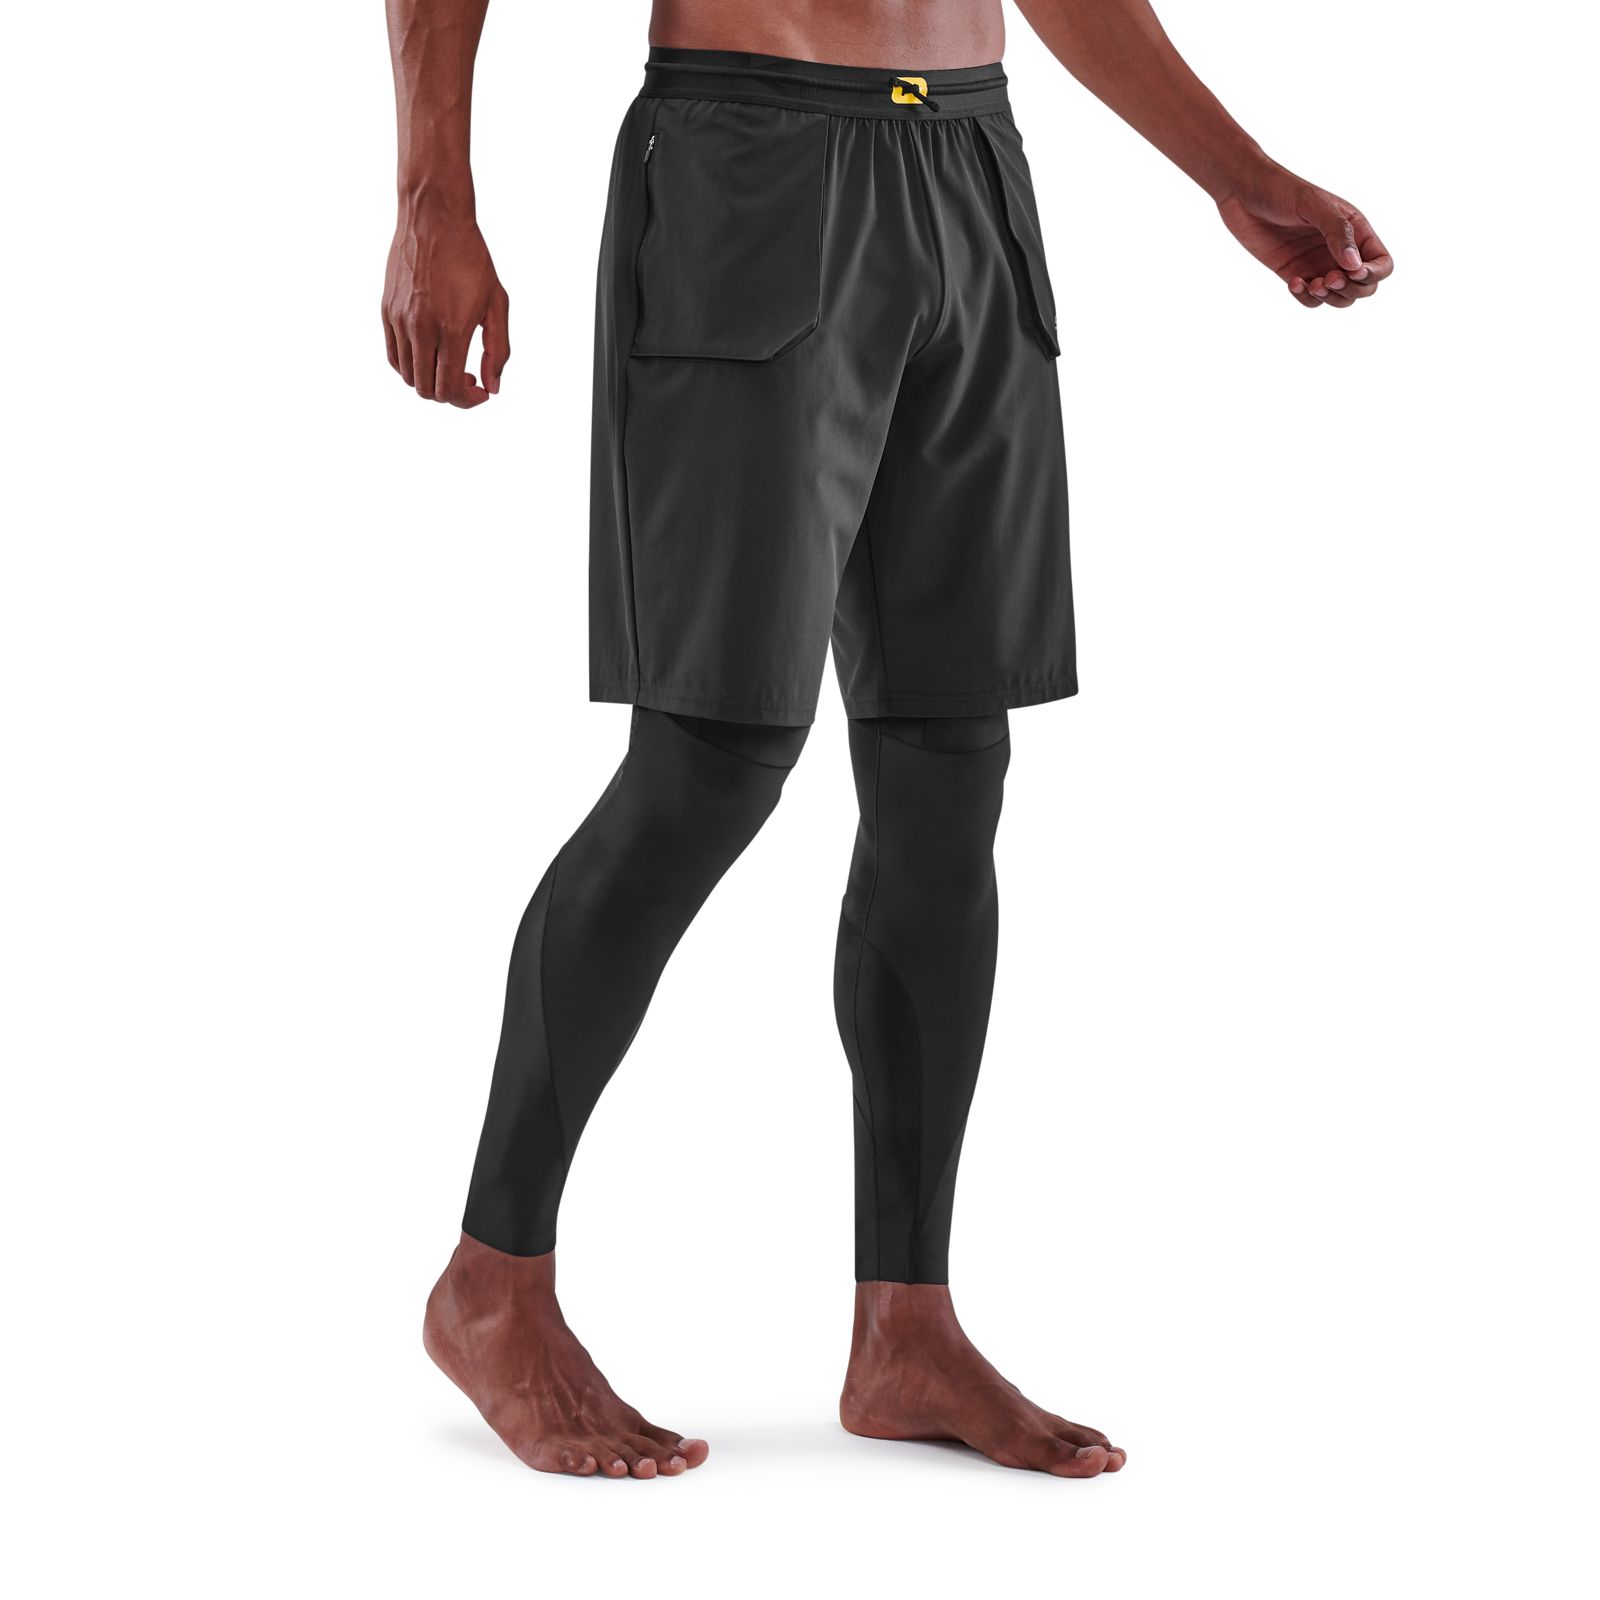 SKINS SERIES-5 MEN'S TRAVEL AND RECOVERY LONG TIGHTS BLACK